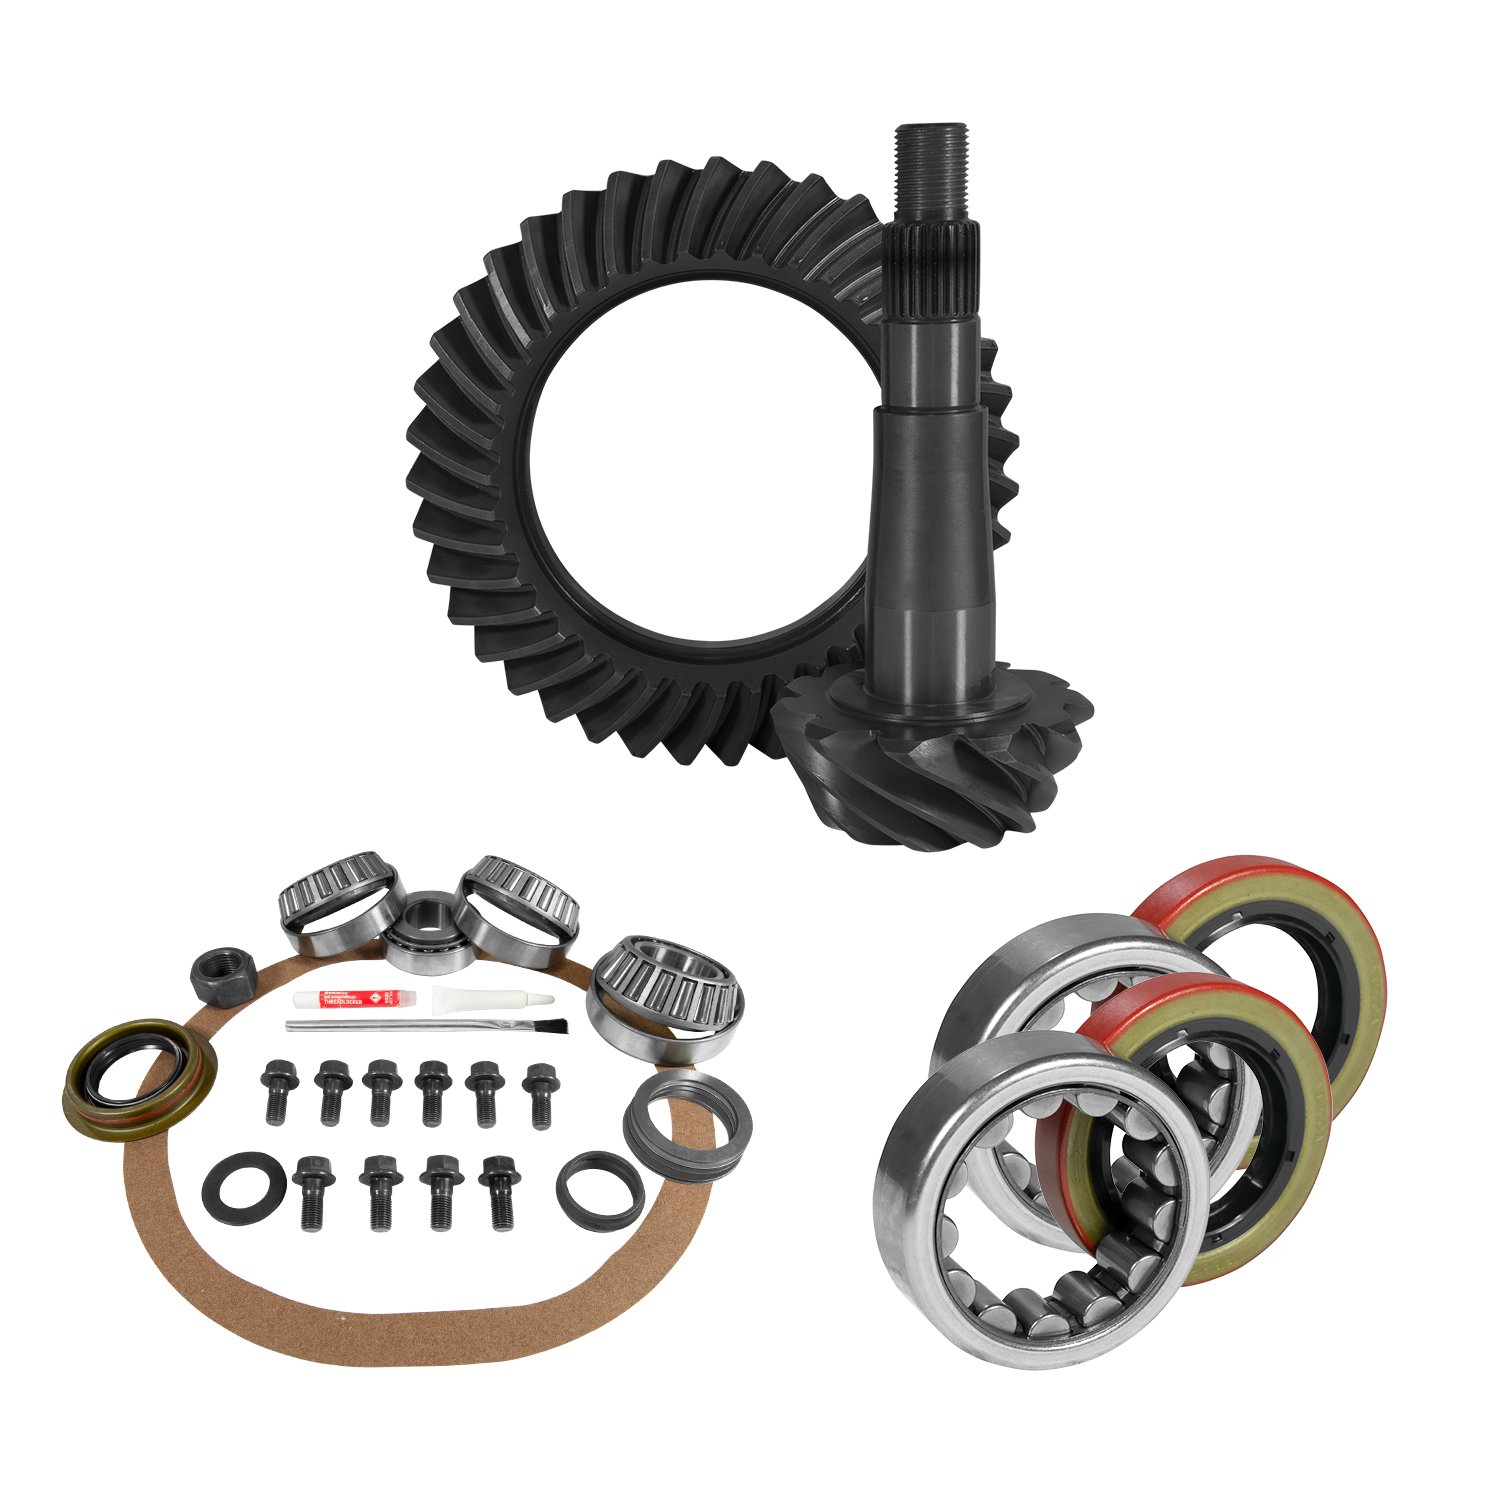 USA Standard 10901 8.25 in. Chy 3.91 Rear Ring & Pinion Install Kit, 1.618 in. Id Axle Bearings & Seals